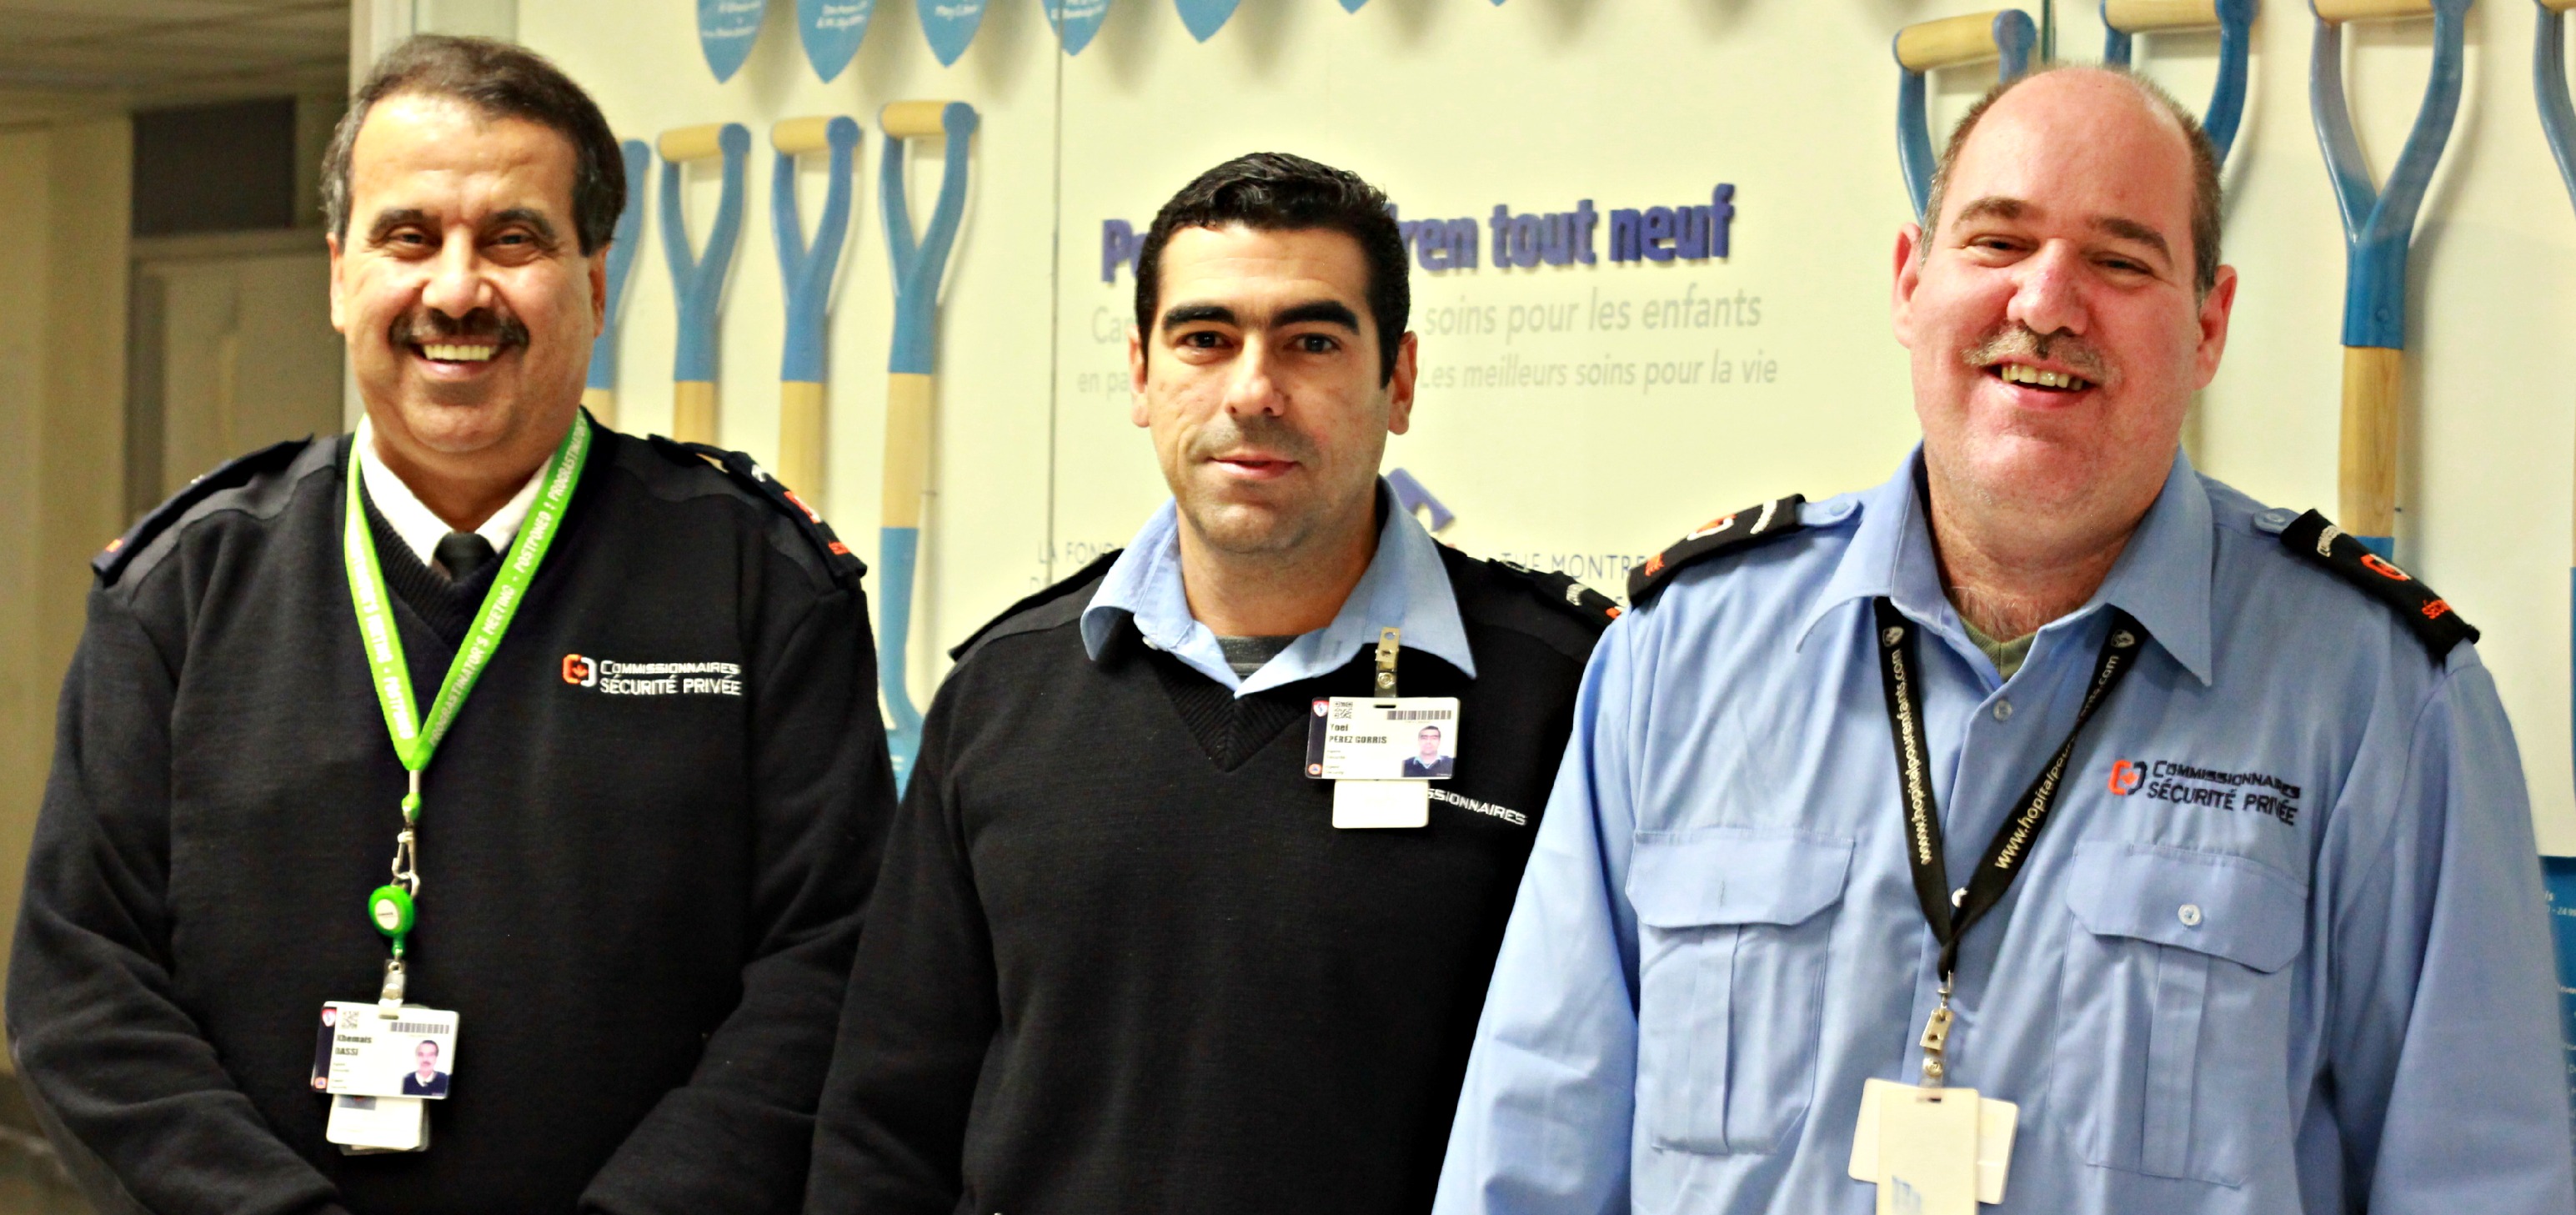 From left to right: Security guards Khemais Dassi, Yoel Perez Gorris and Gilles Gauthier protect the building of the former MCH and the few members of administration of the MUHC who occasionally visit.